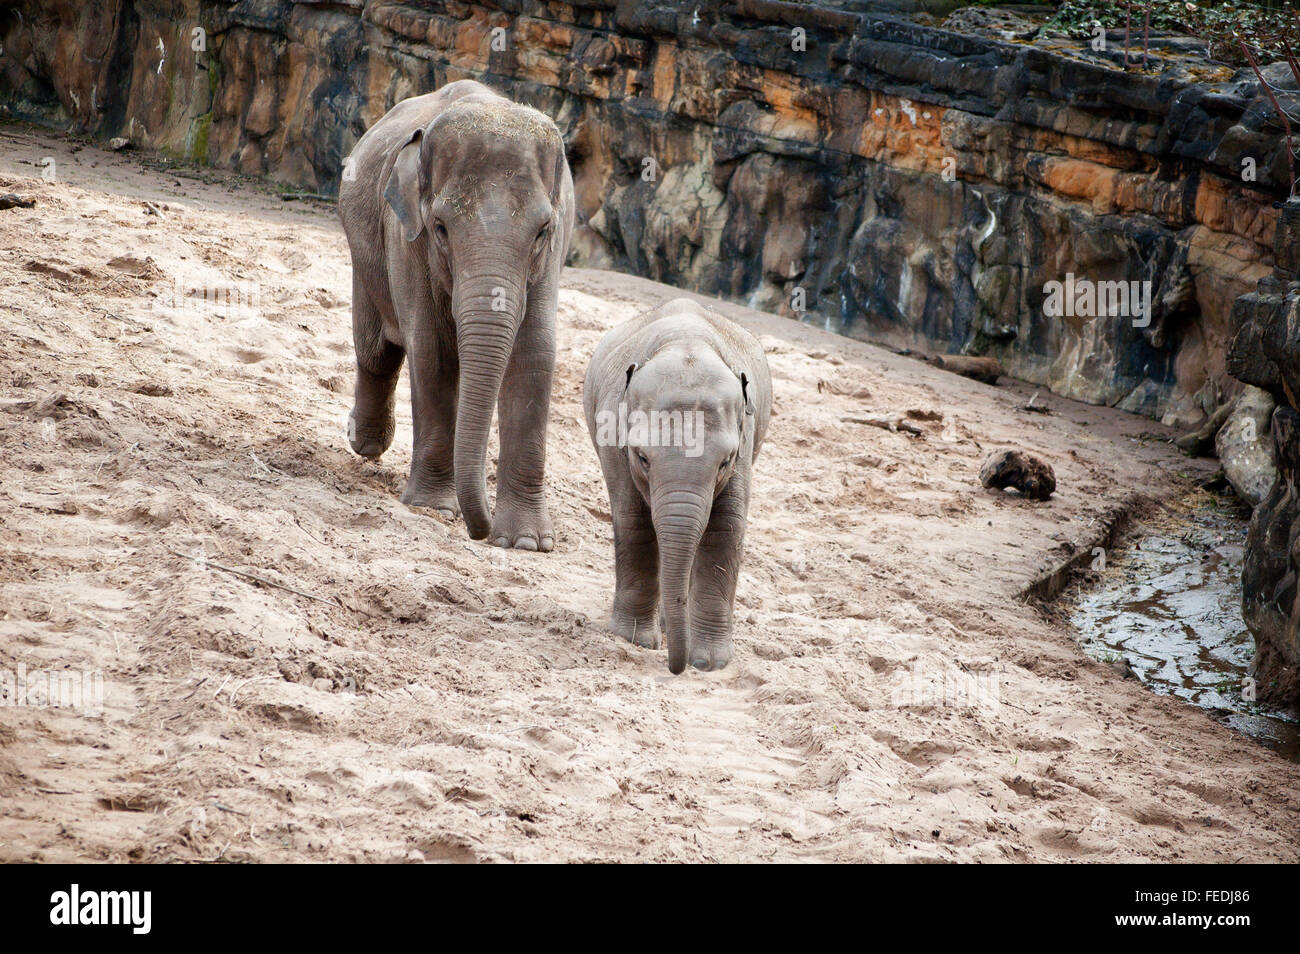 Mother and Baby Asian Elephants walking within an enclosure in captivity (in a zoo) Stock Photo